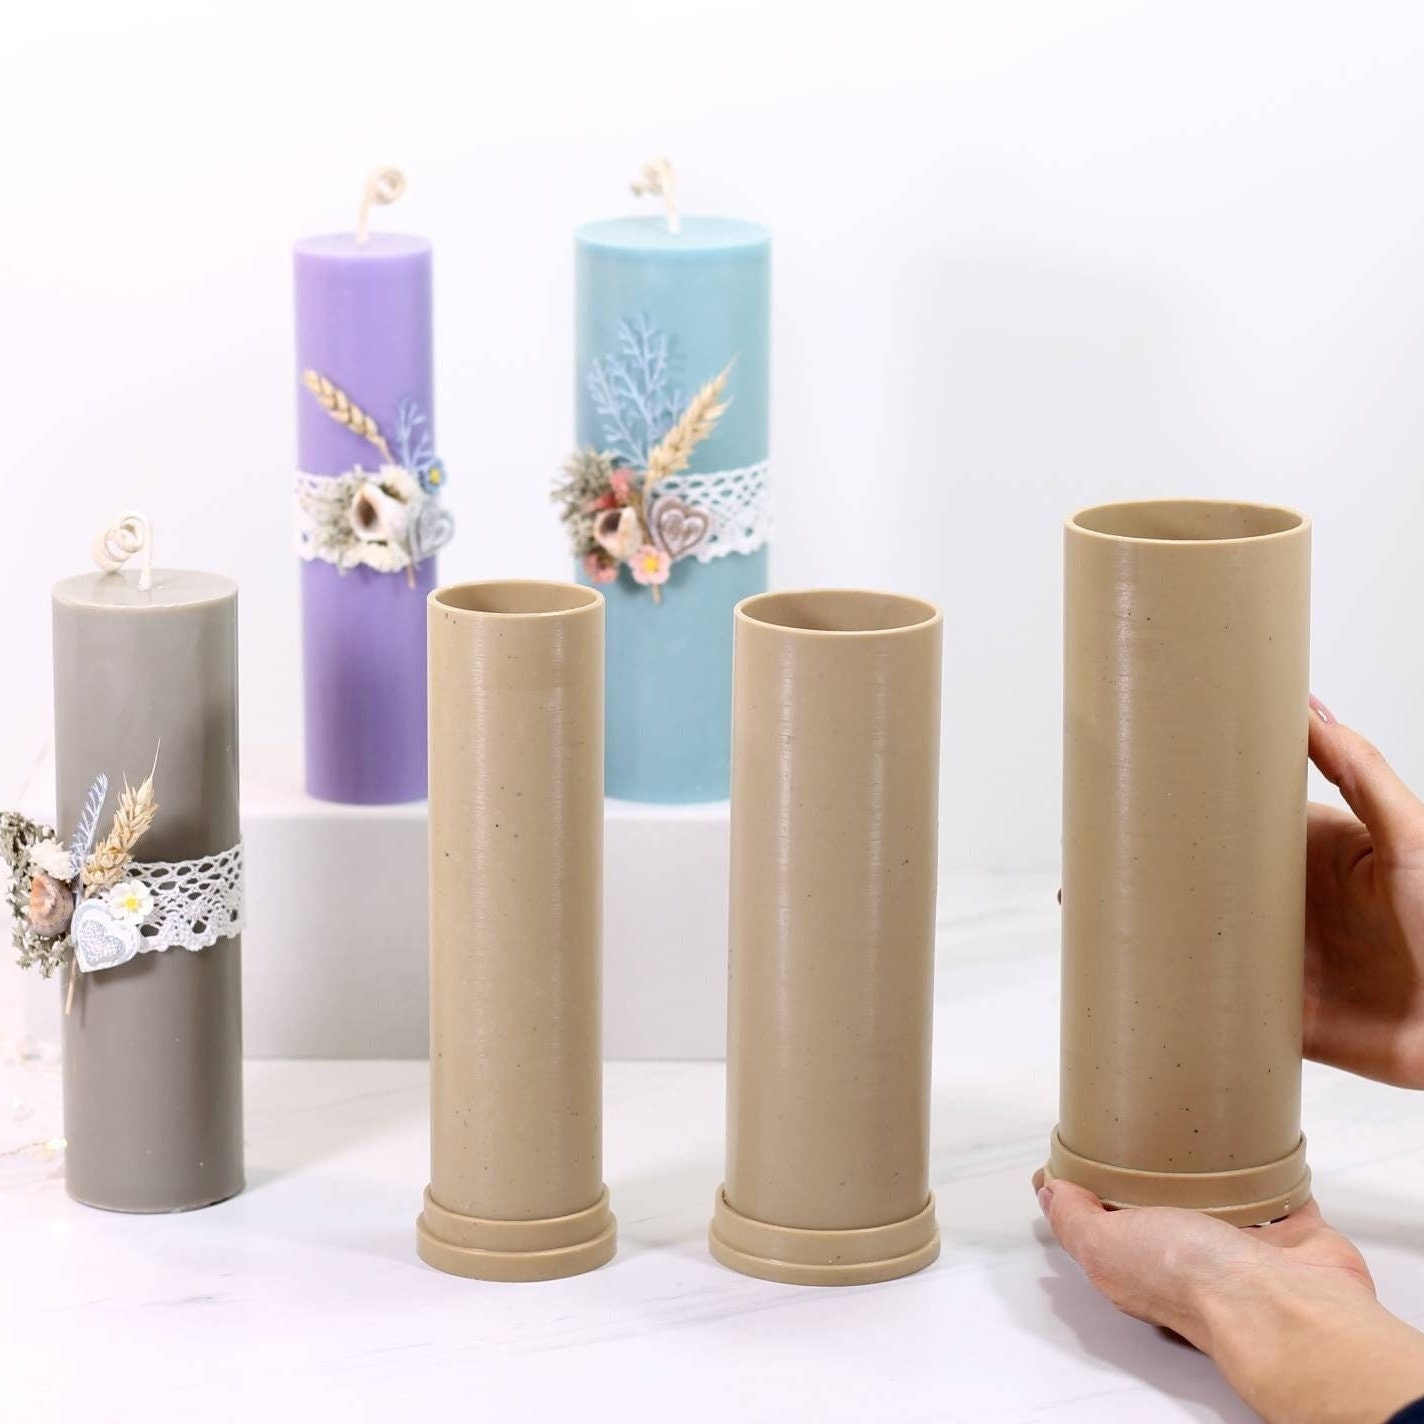 Cylindrical Candle Molds for Candles Making, Pillar Candle Mold DIY Soy Wax  Beewax Handmade Supplies Moulds 